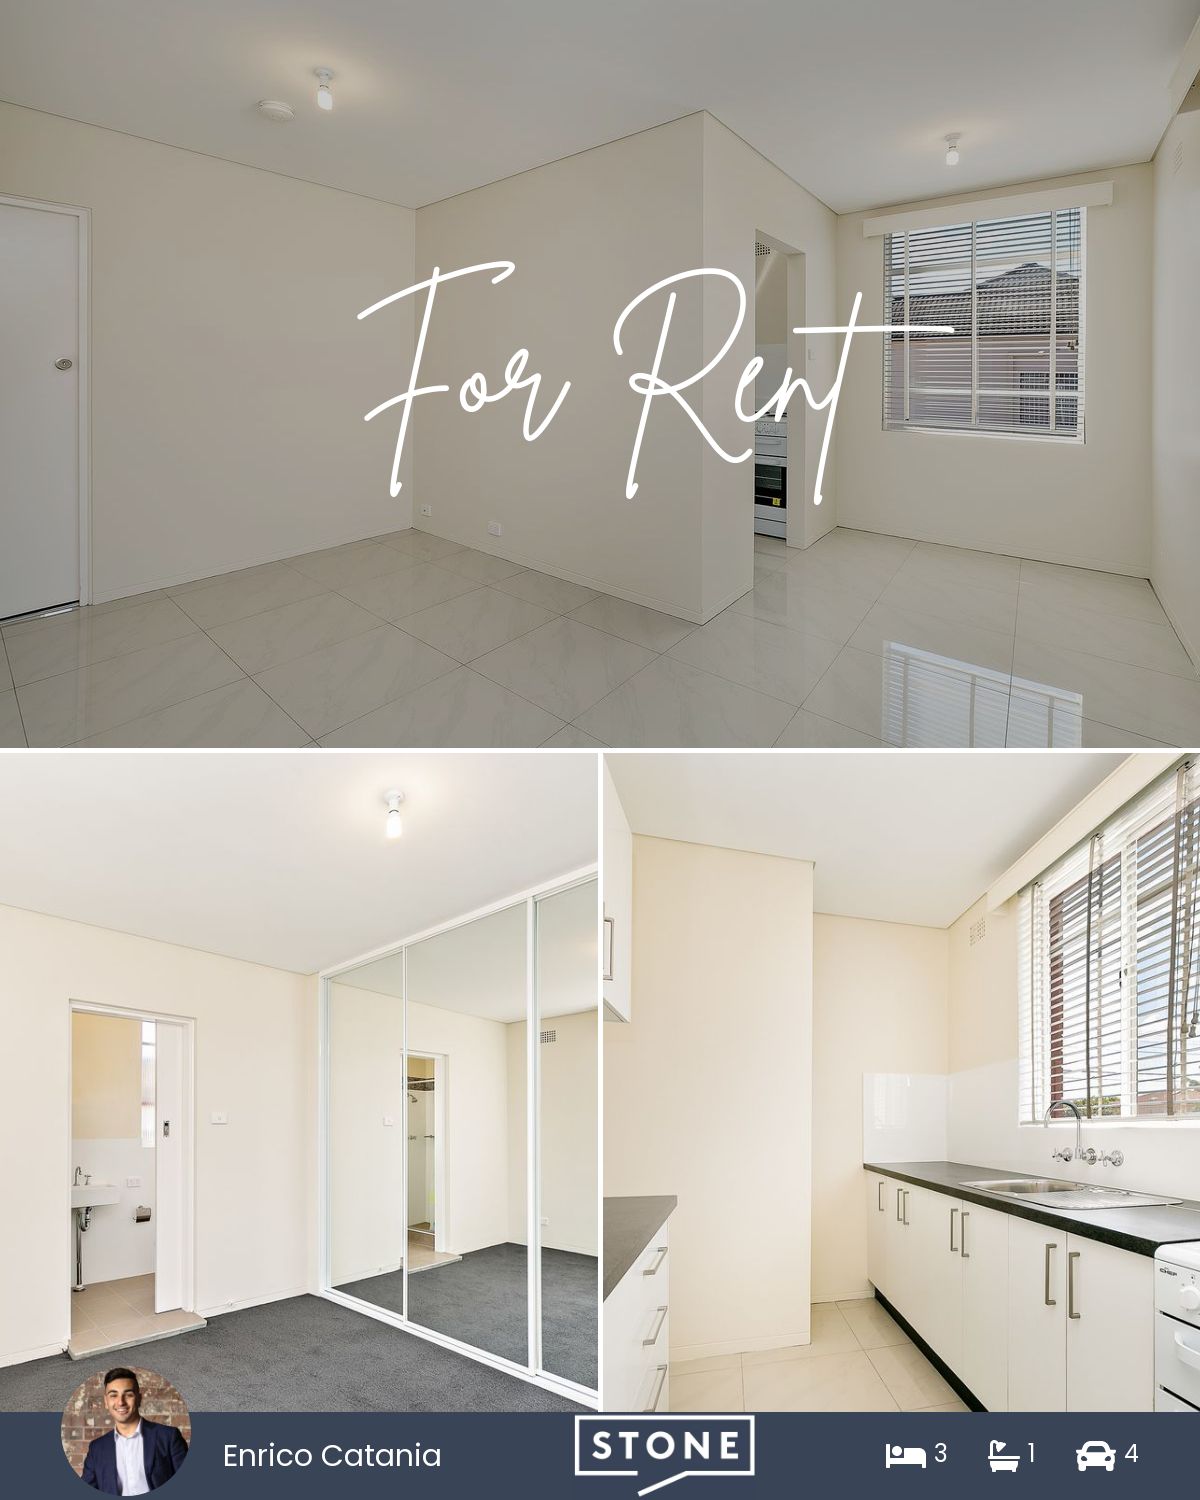 8/253 Queen Street, Concord West, NSW 2138 | Realty.com.au